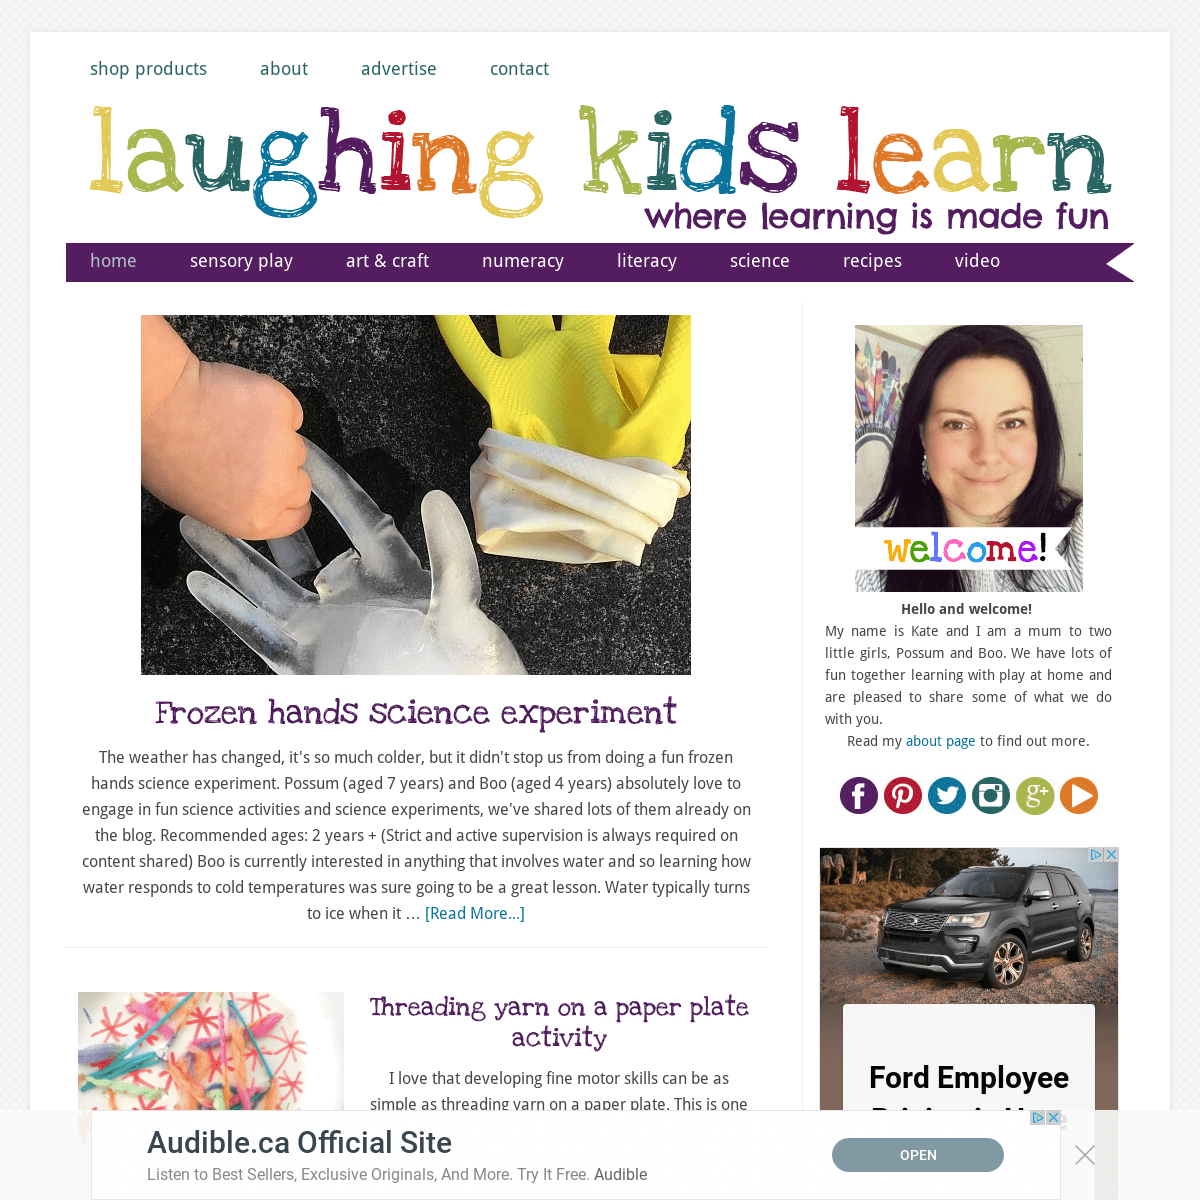 Laughing Kids Learn - Where learning is made fun